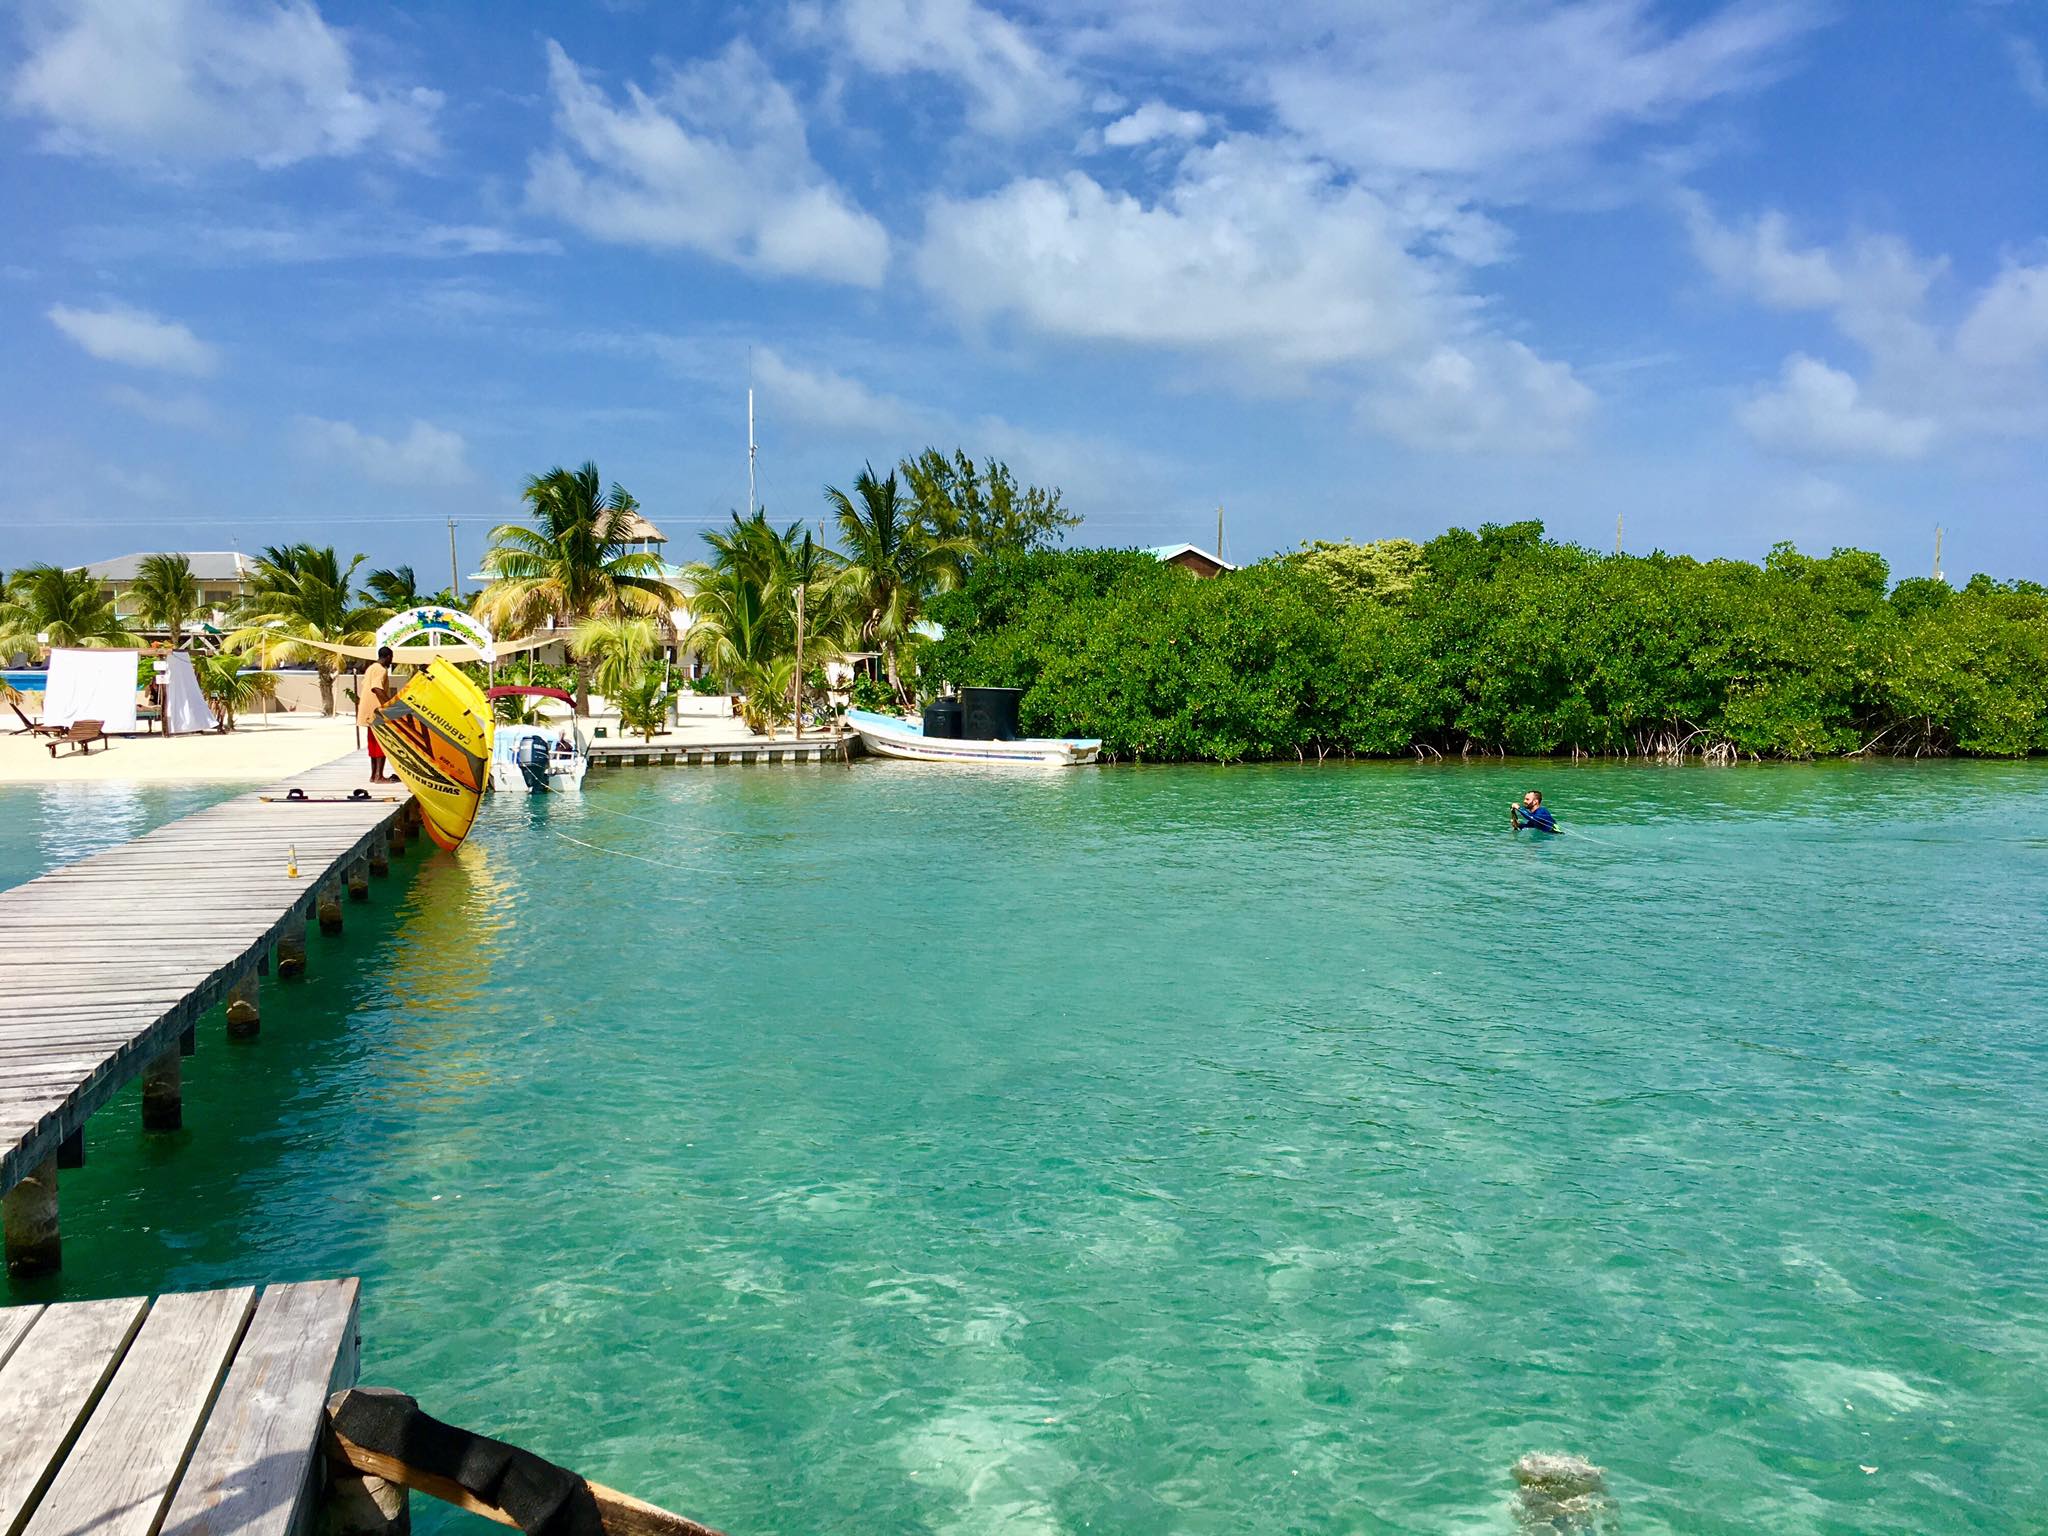 Go Slow With These 12 Fun Things To Do In Caye Caulker, Belize